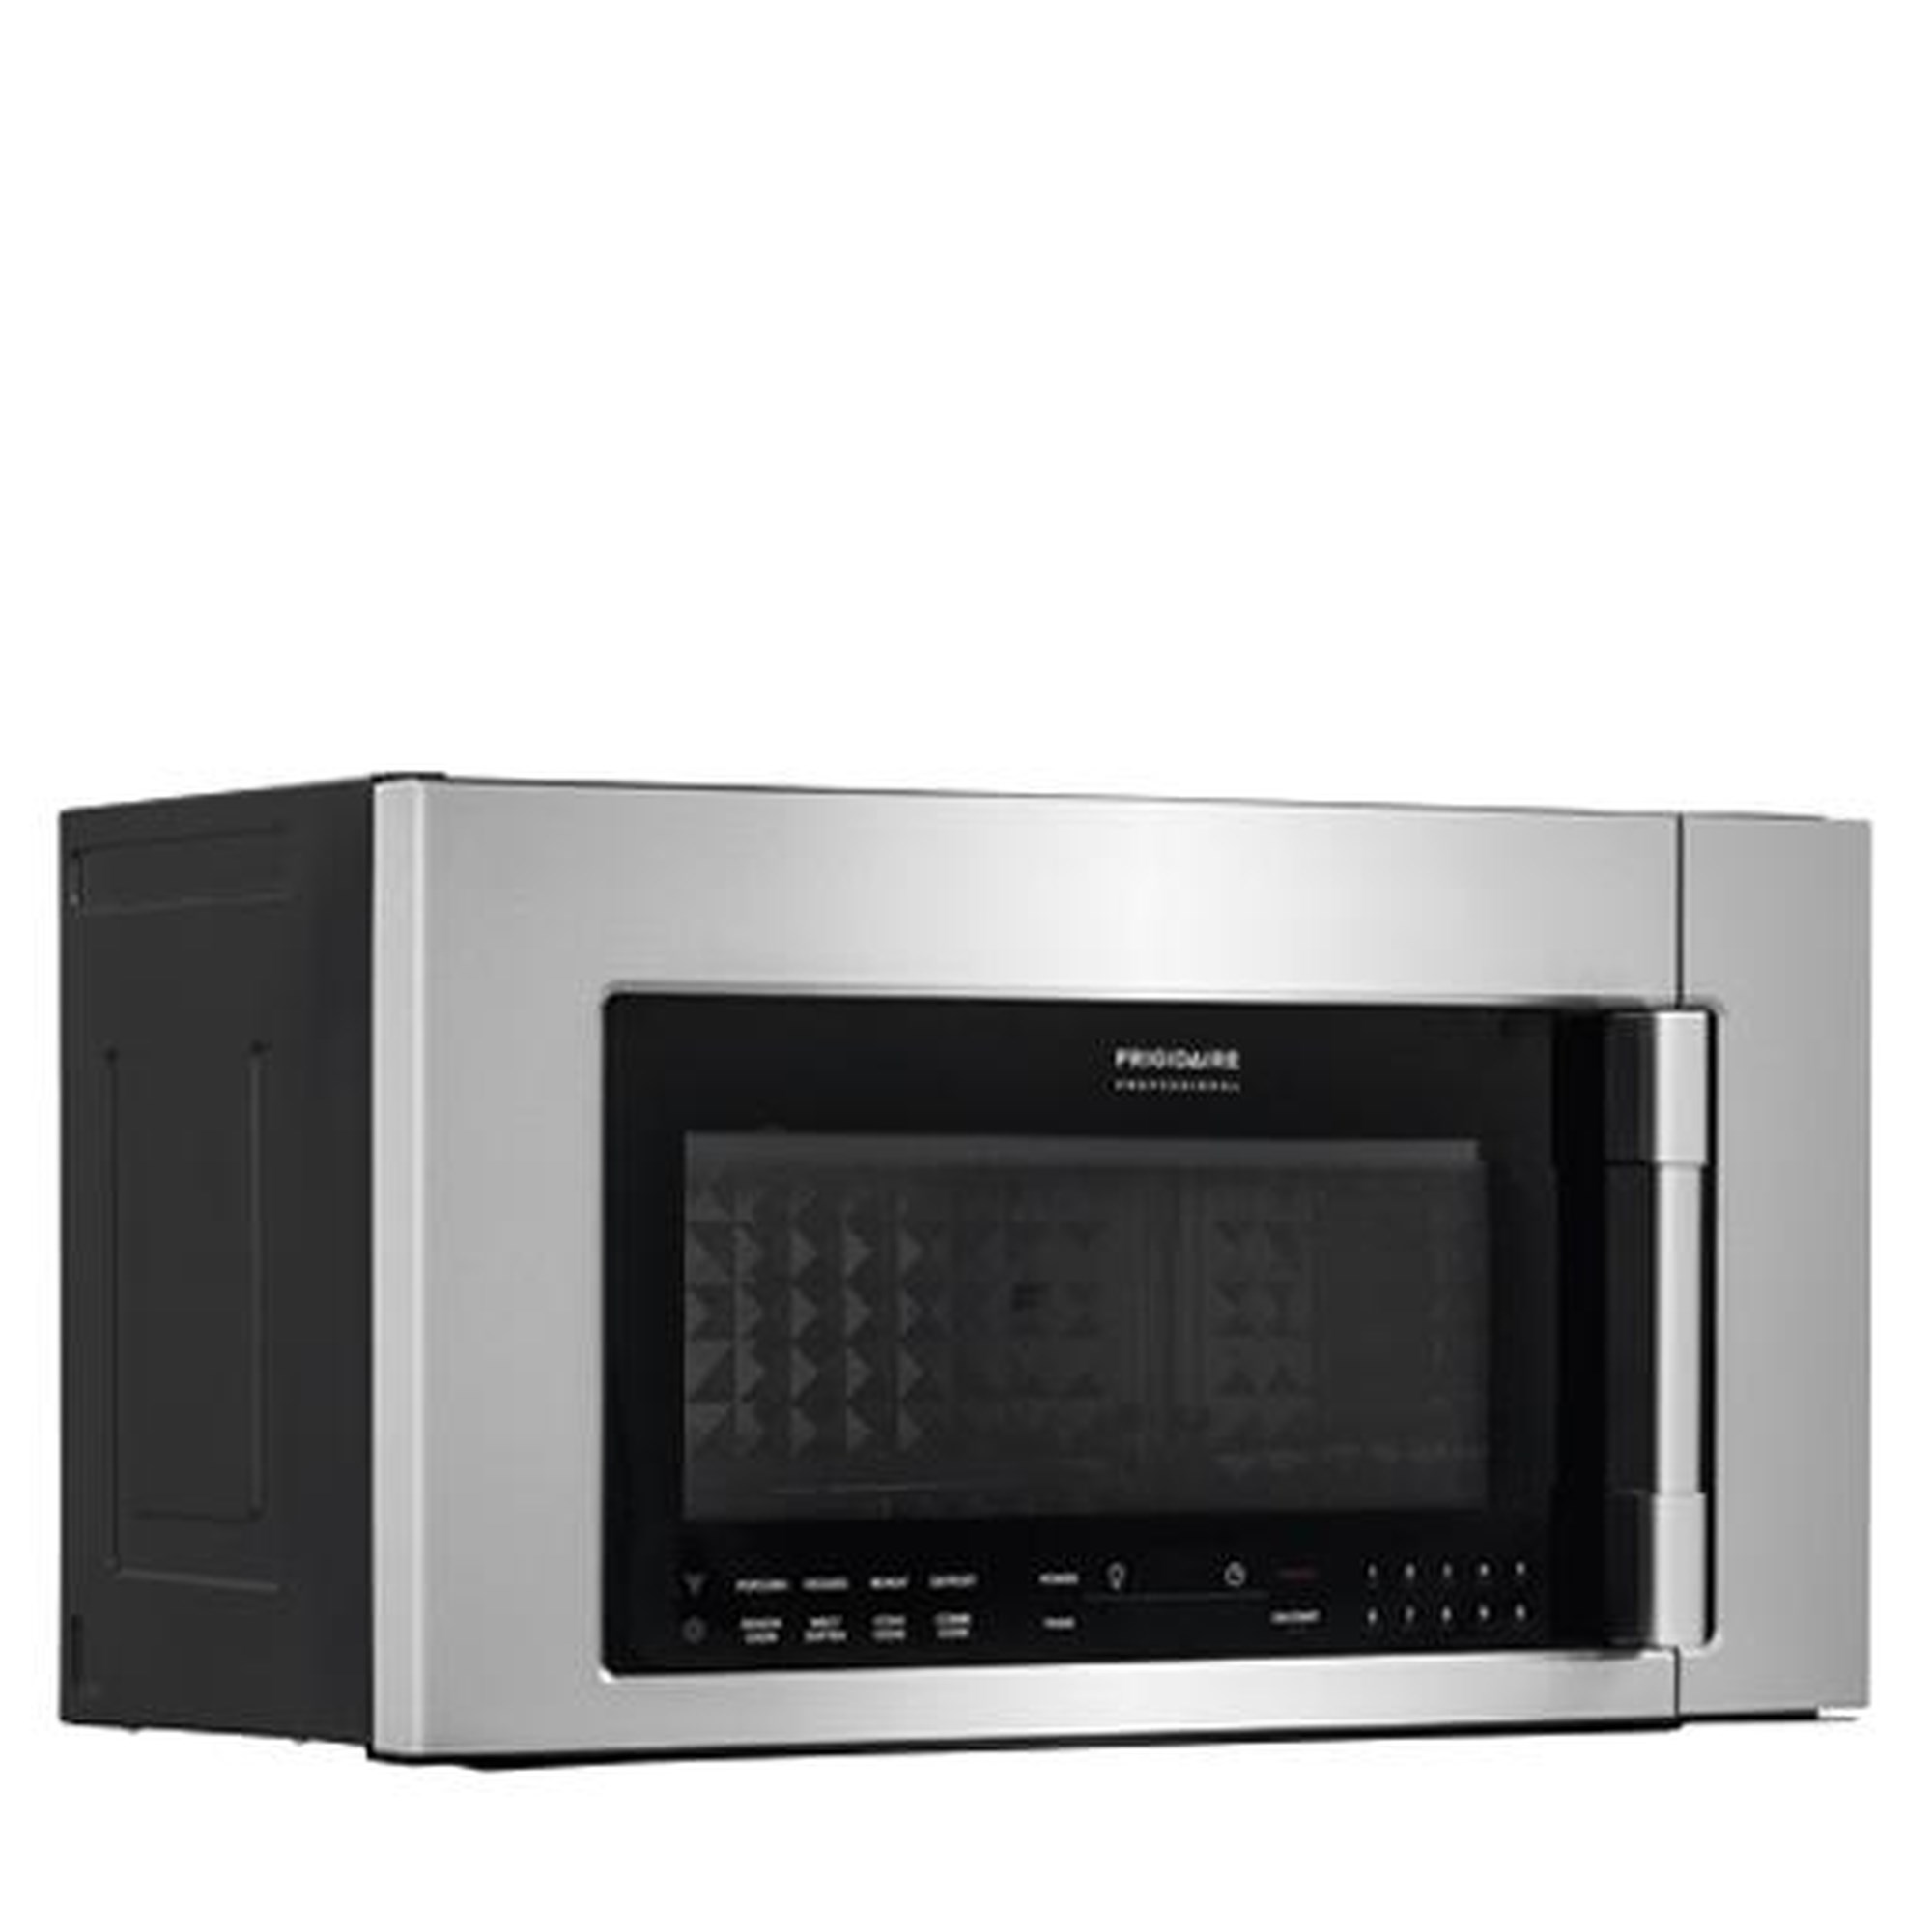 https://imageresizer4.furnituredealer.net/img/remote/images.furnituredealer.net/img/products%2Ffrigidaire%2Fcolor%2Fprofessional%20collection%20-%20microwaves_fpbm3077rf-b1.jpg?width=2000&height=2000&scale=both